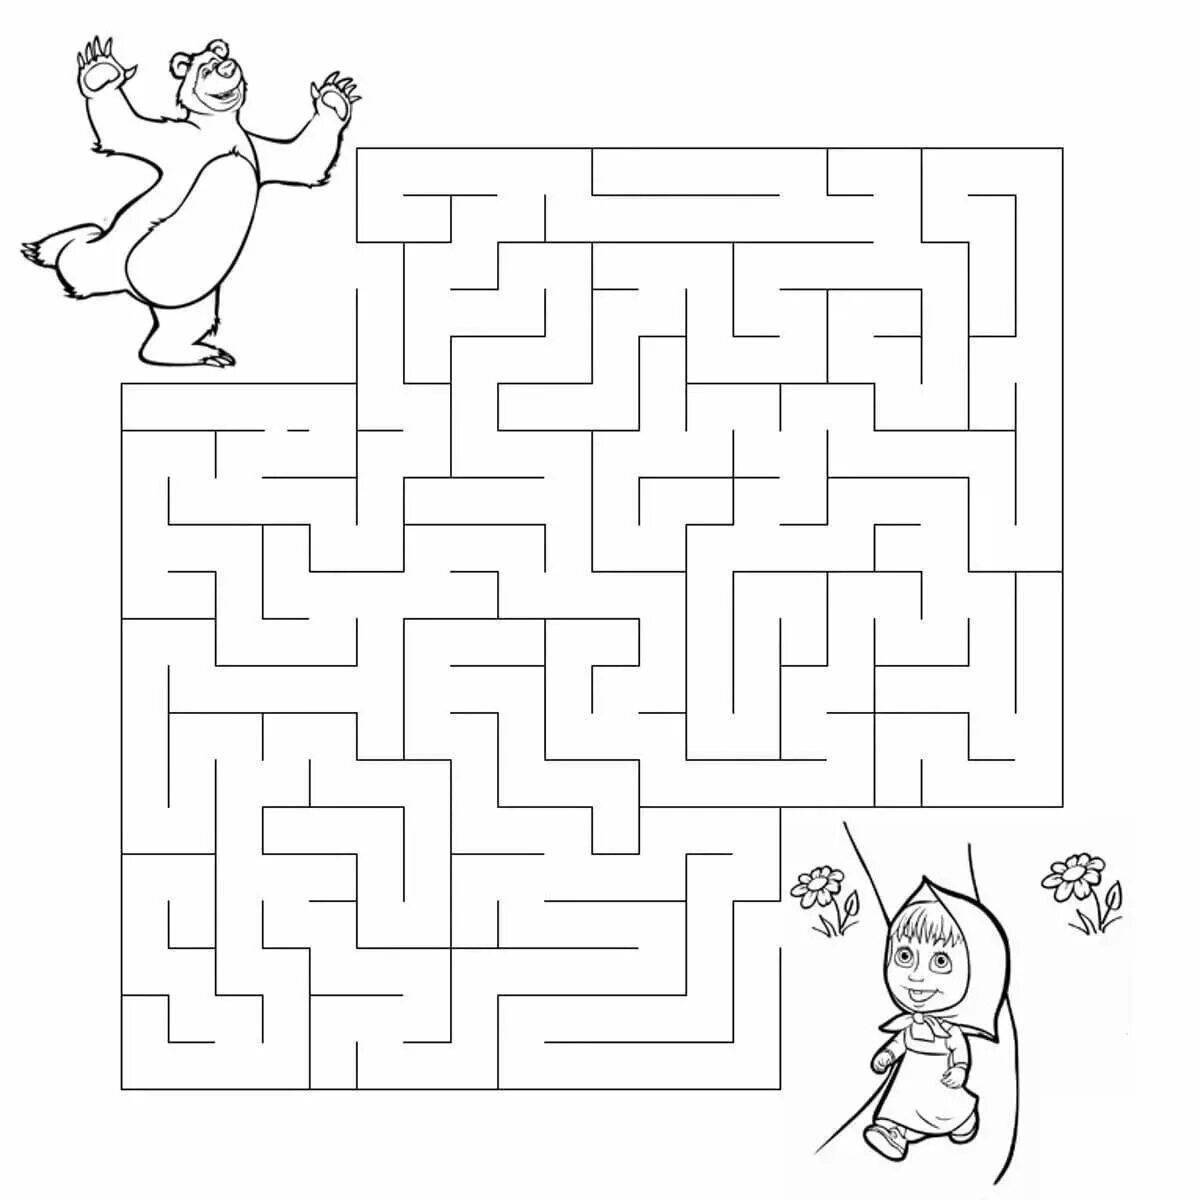 Adorable maze coloring book for 4-5 year olds